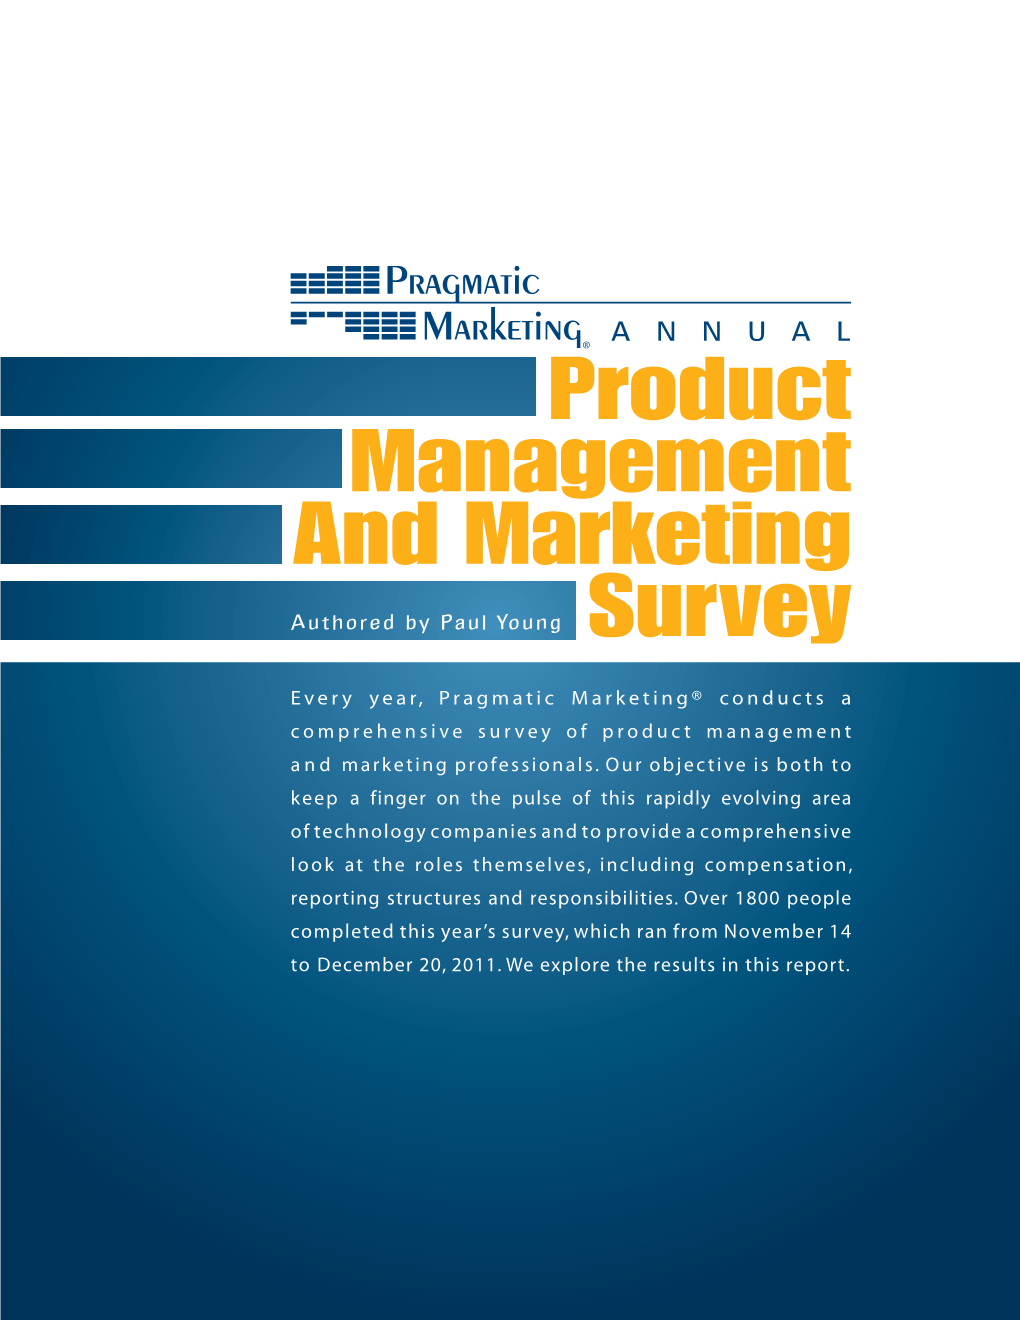 ANNUAL Product Management and Marketing Authored by Paul Young Survey